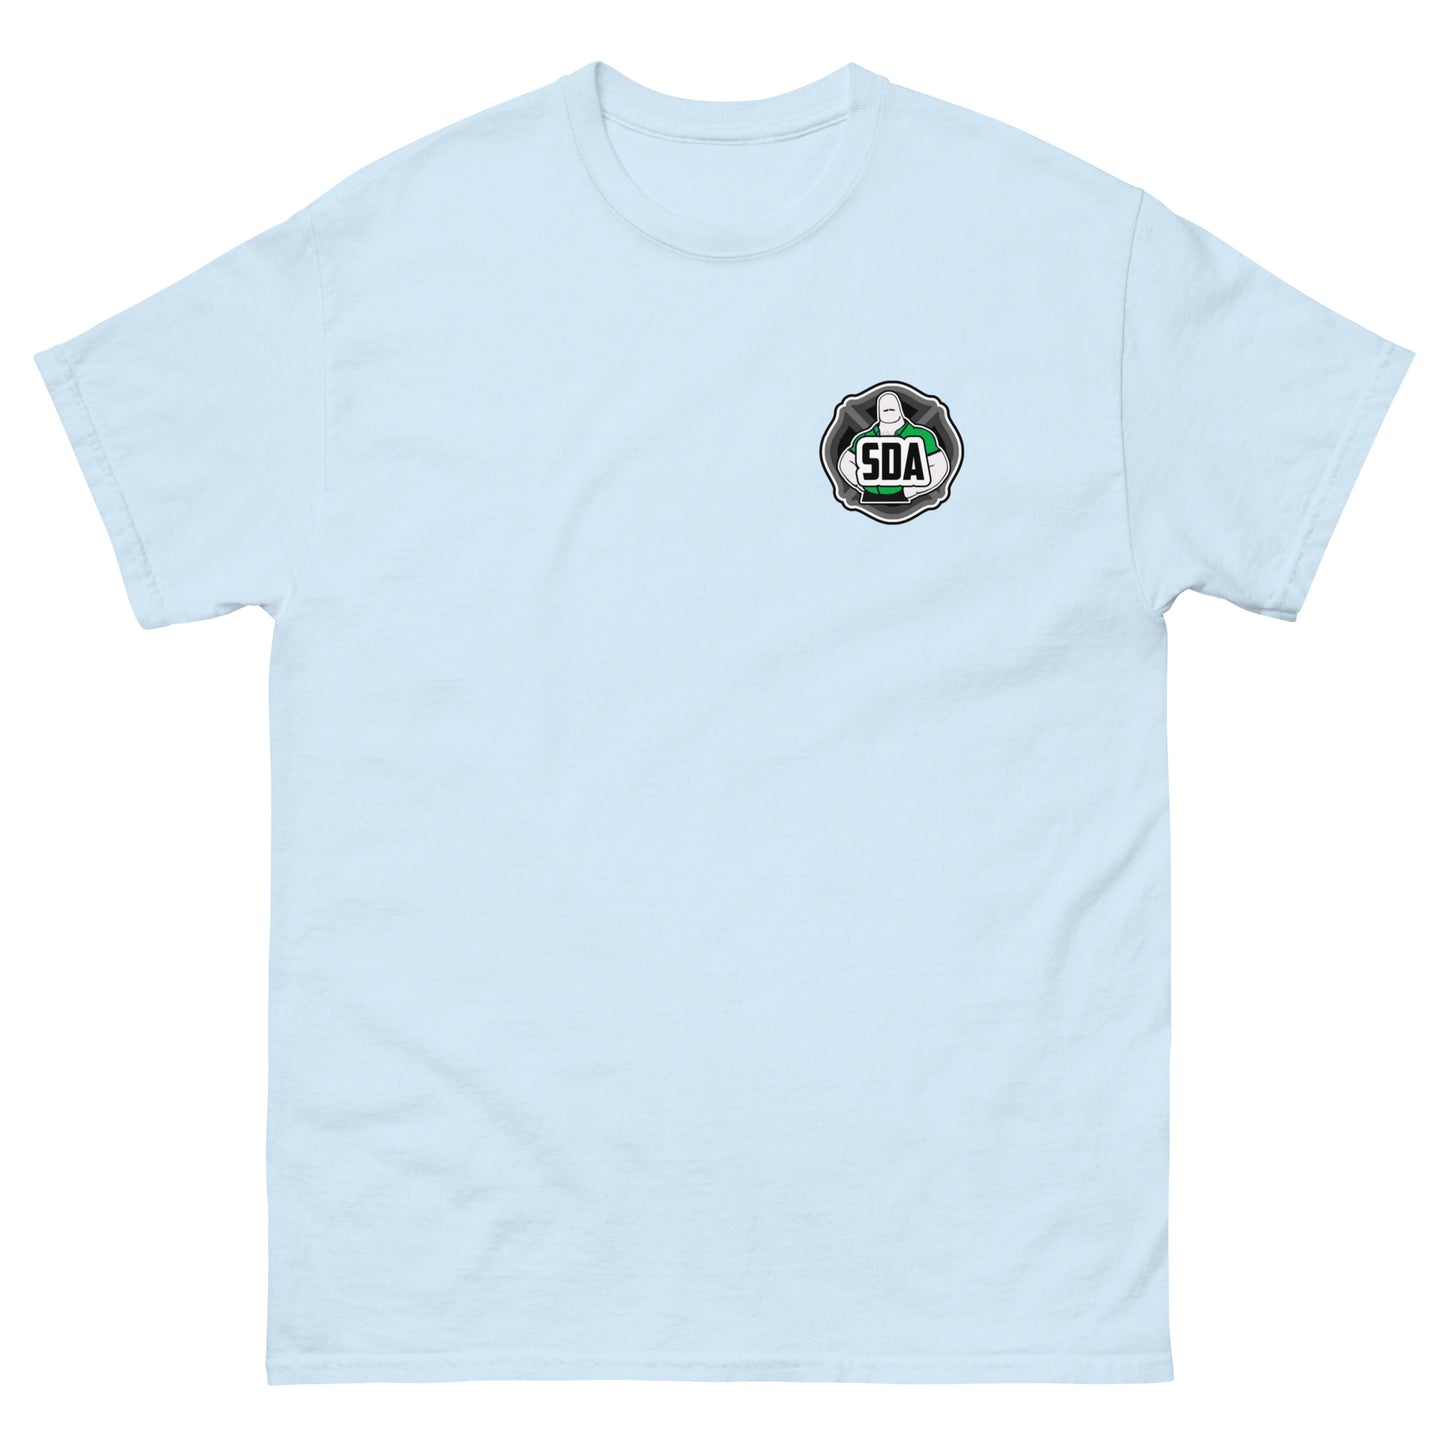 Support local (Maltese version) classic tee